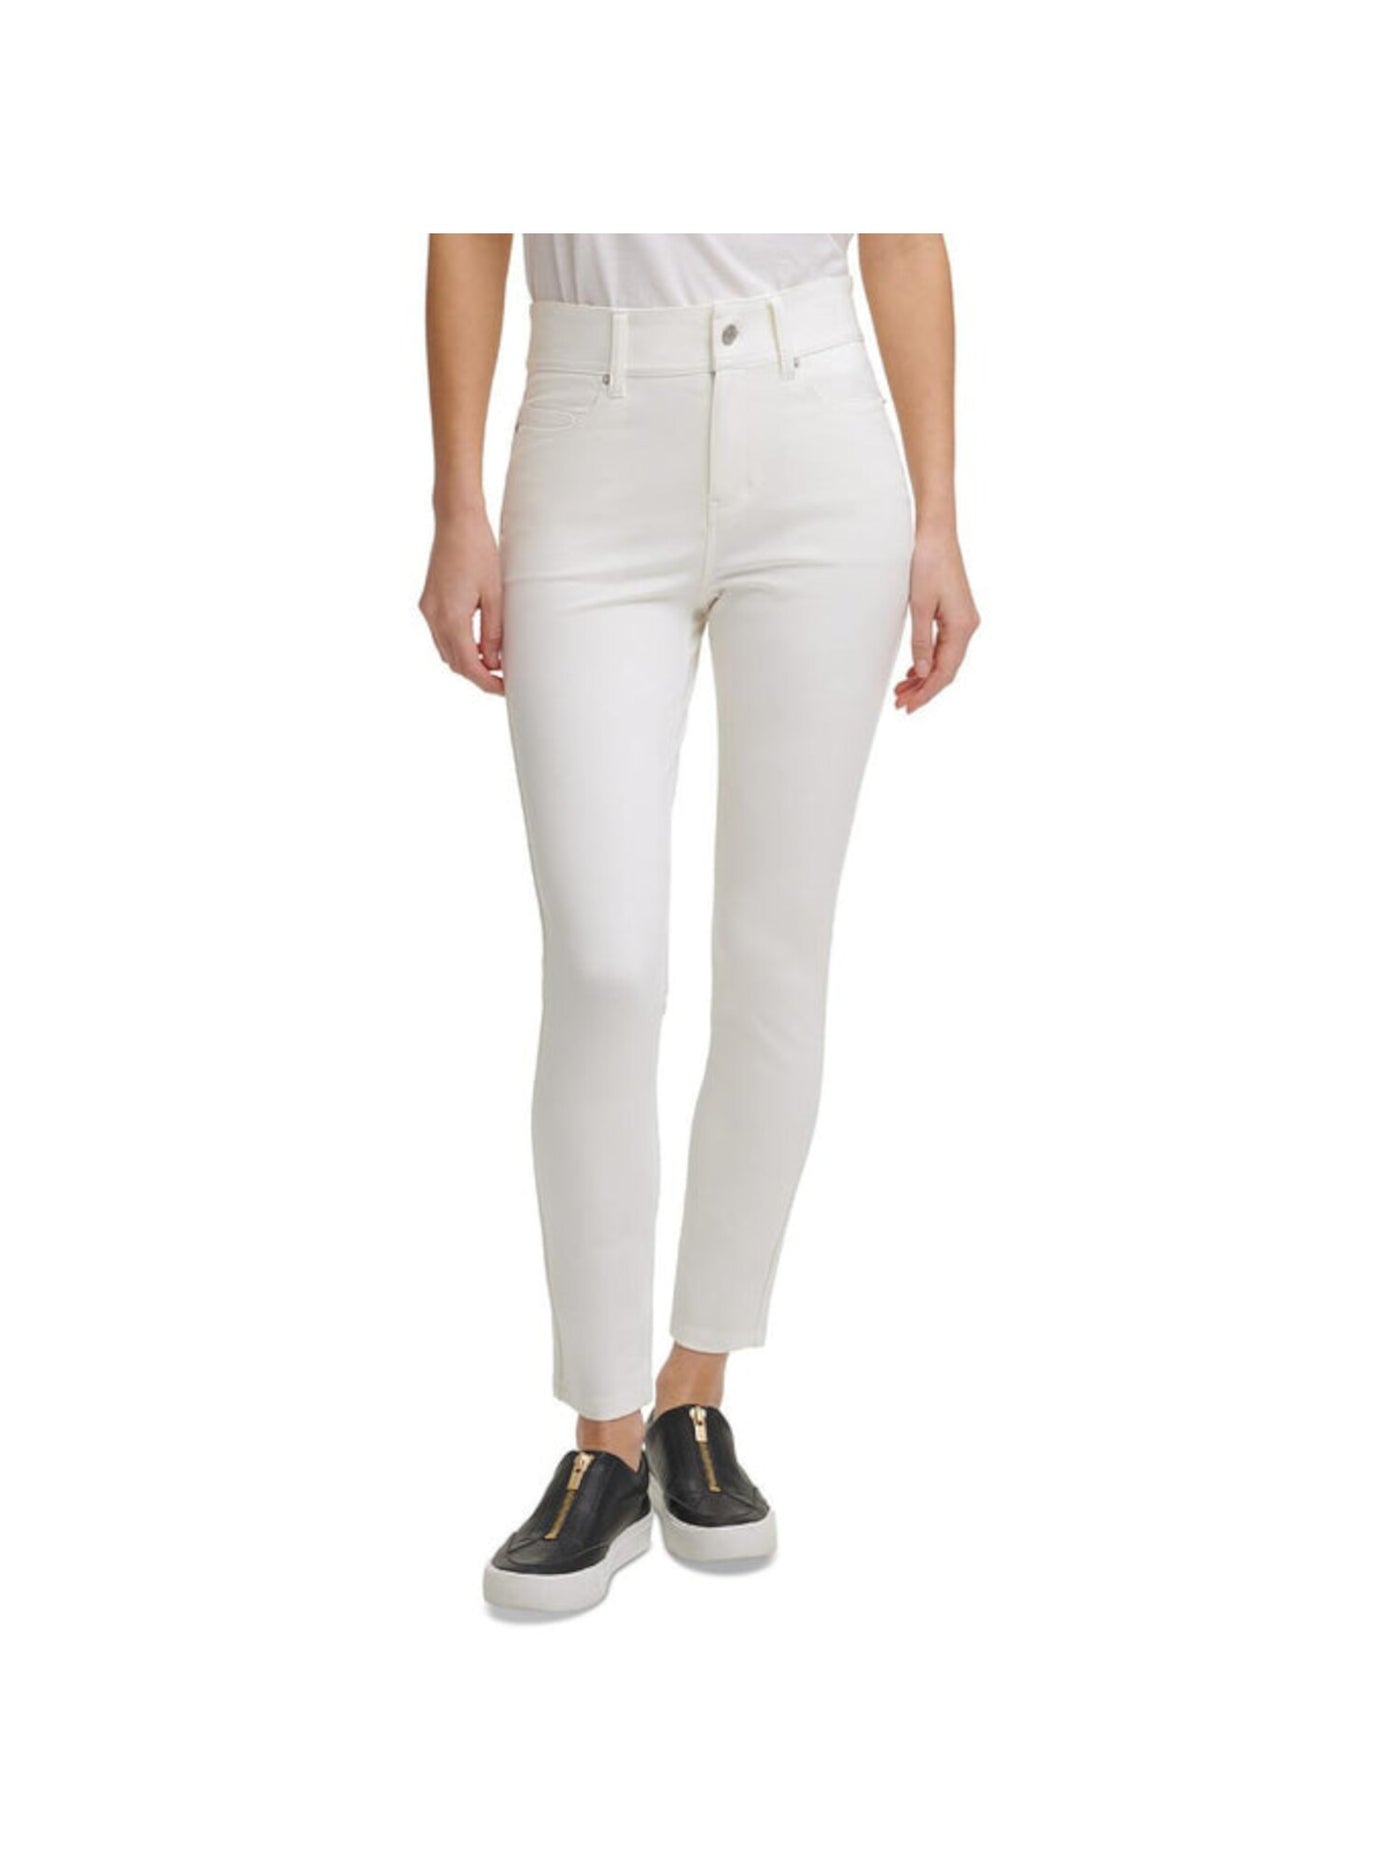 DKNY Womens Stretch Pocketed Mid-rise Skinny Jeans